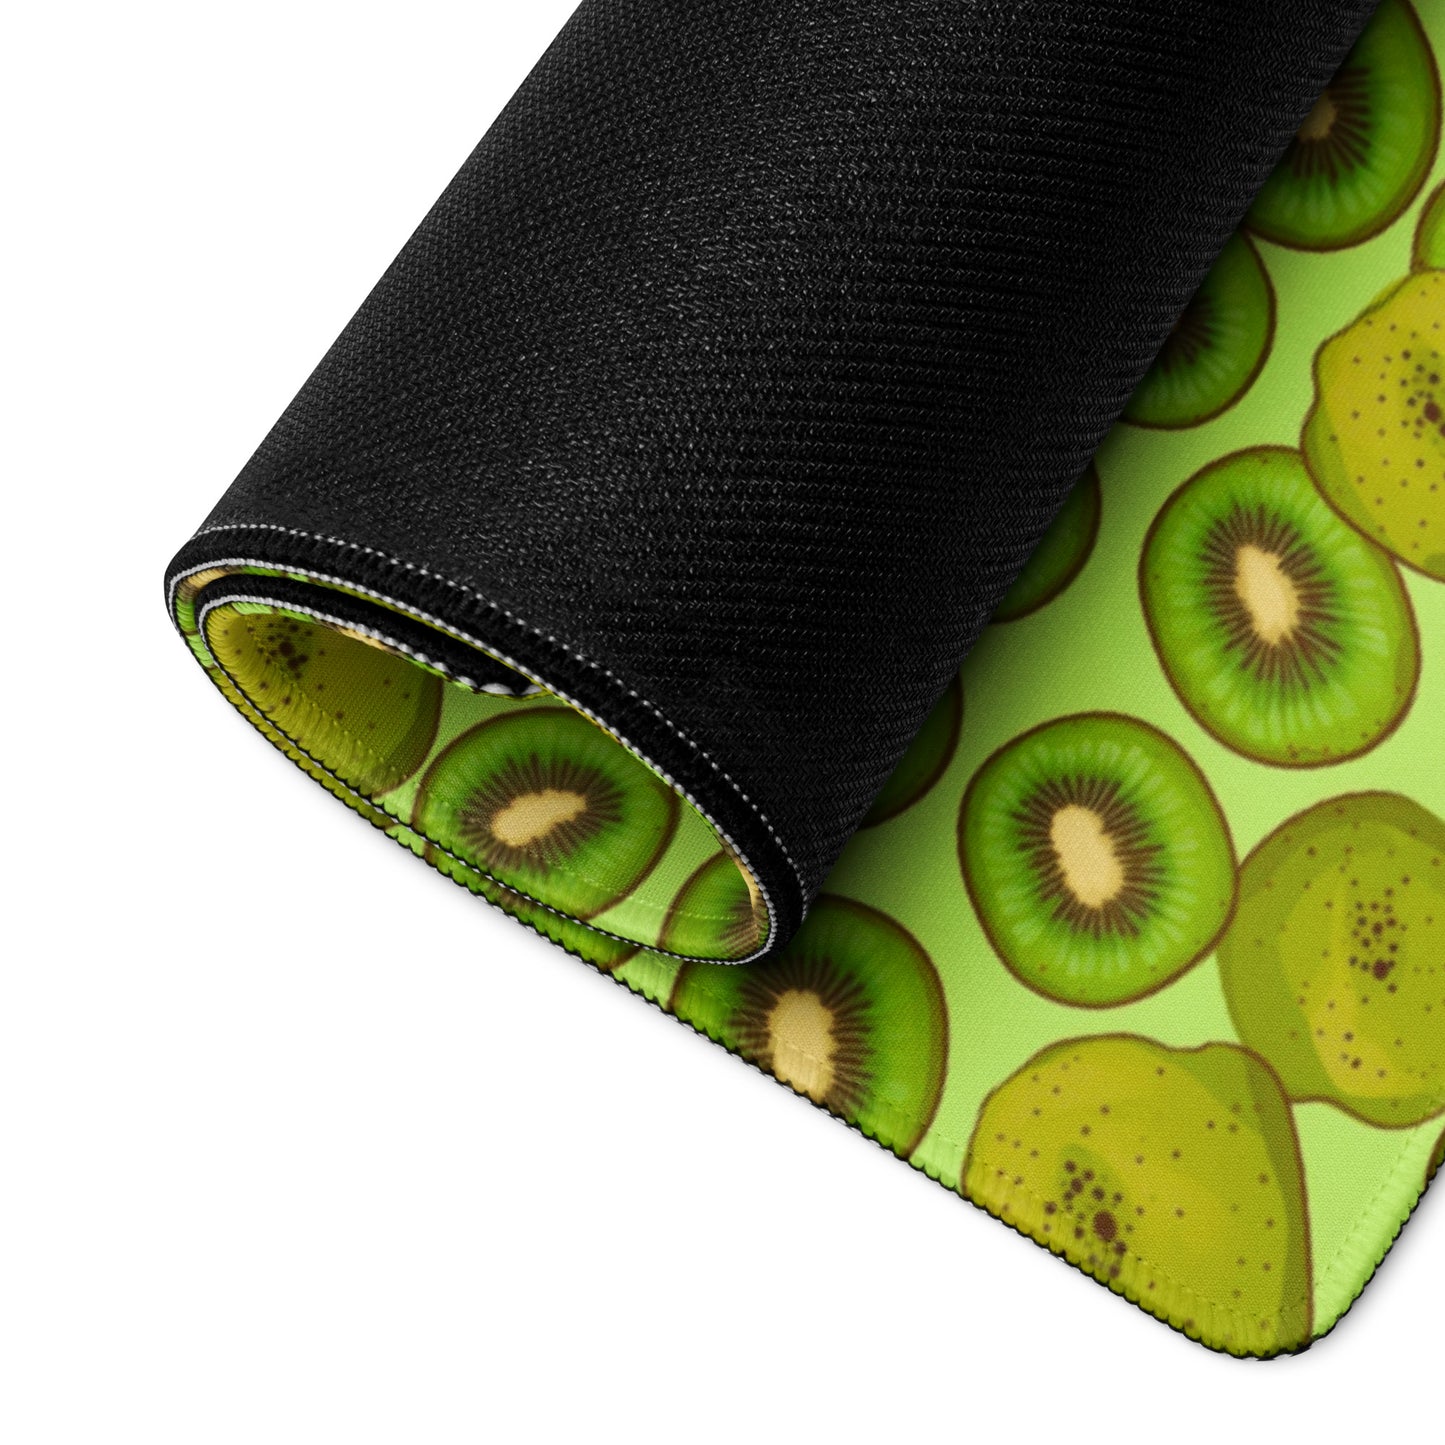 A 36" x 18" desk pad with Kiwis all over it rolled up. Green in color.